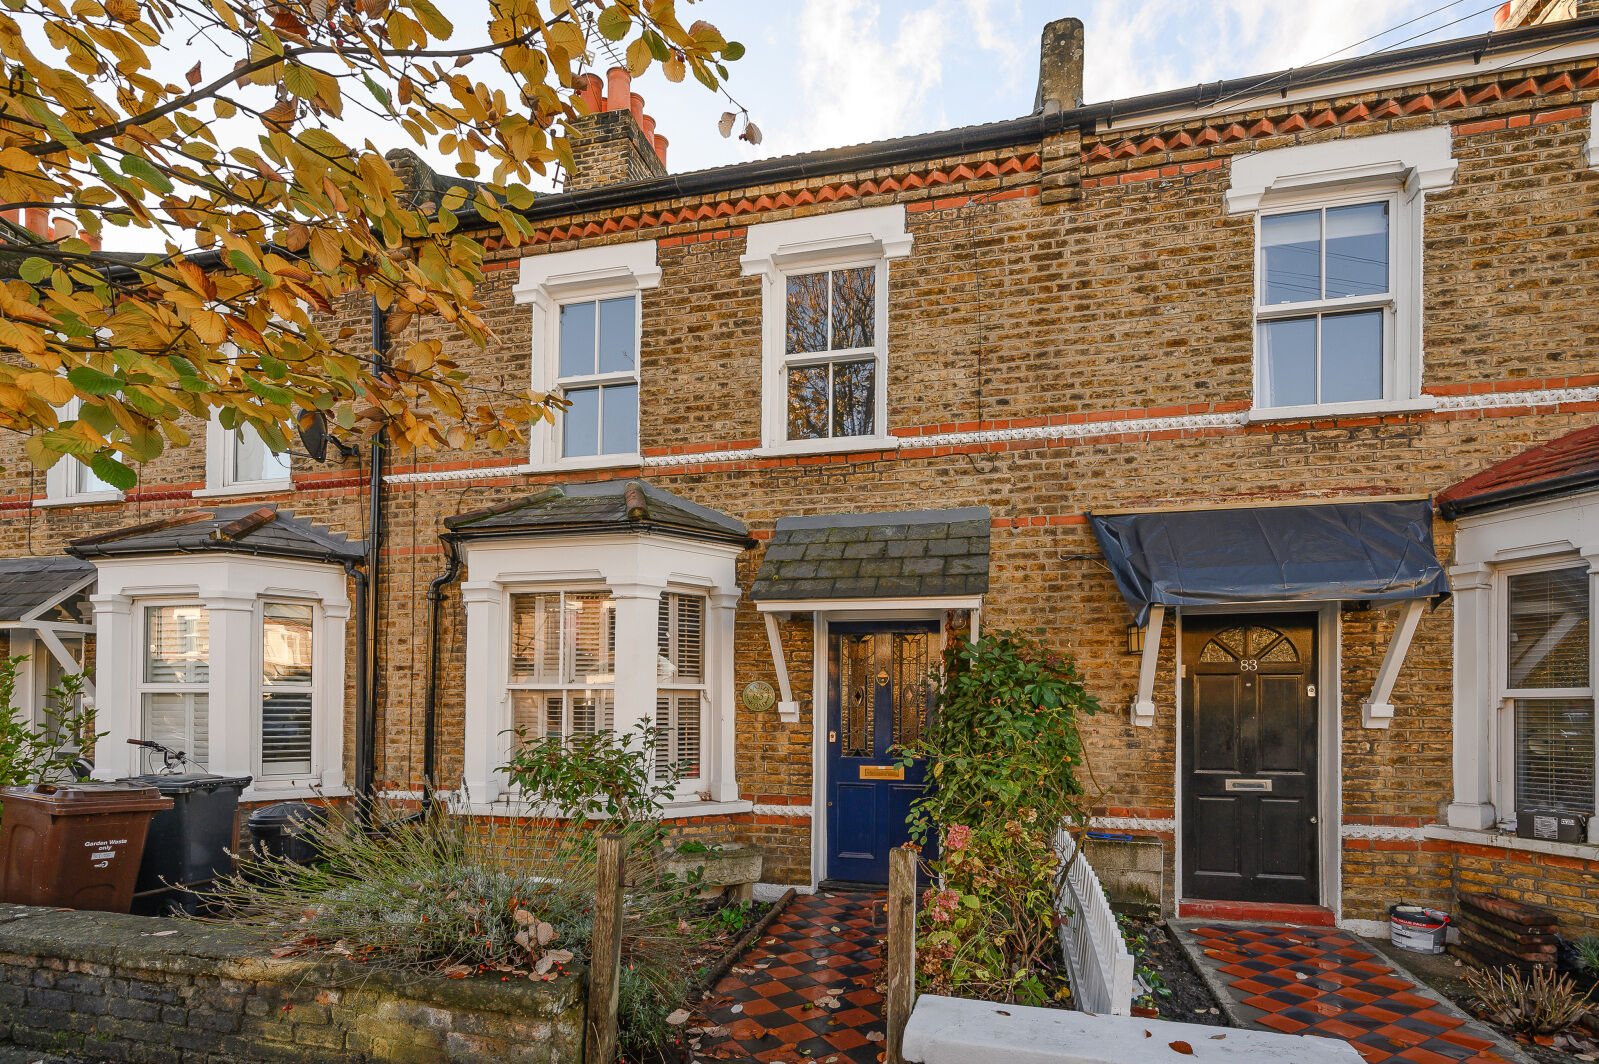 2 bedroom mid terraced house for sale Hardy Road, London, SW19, main image